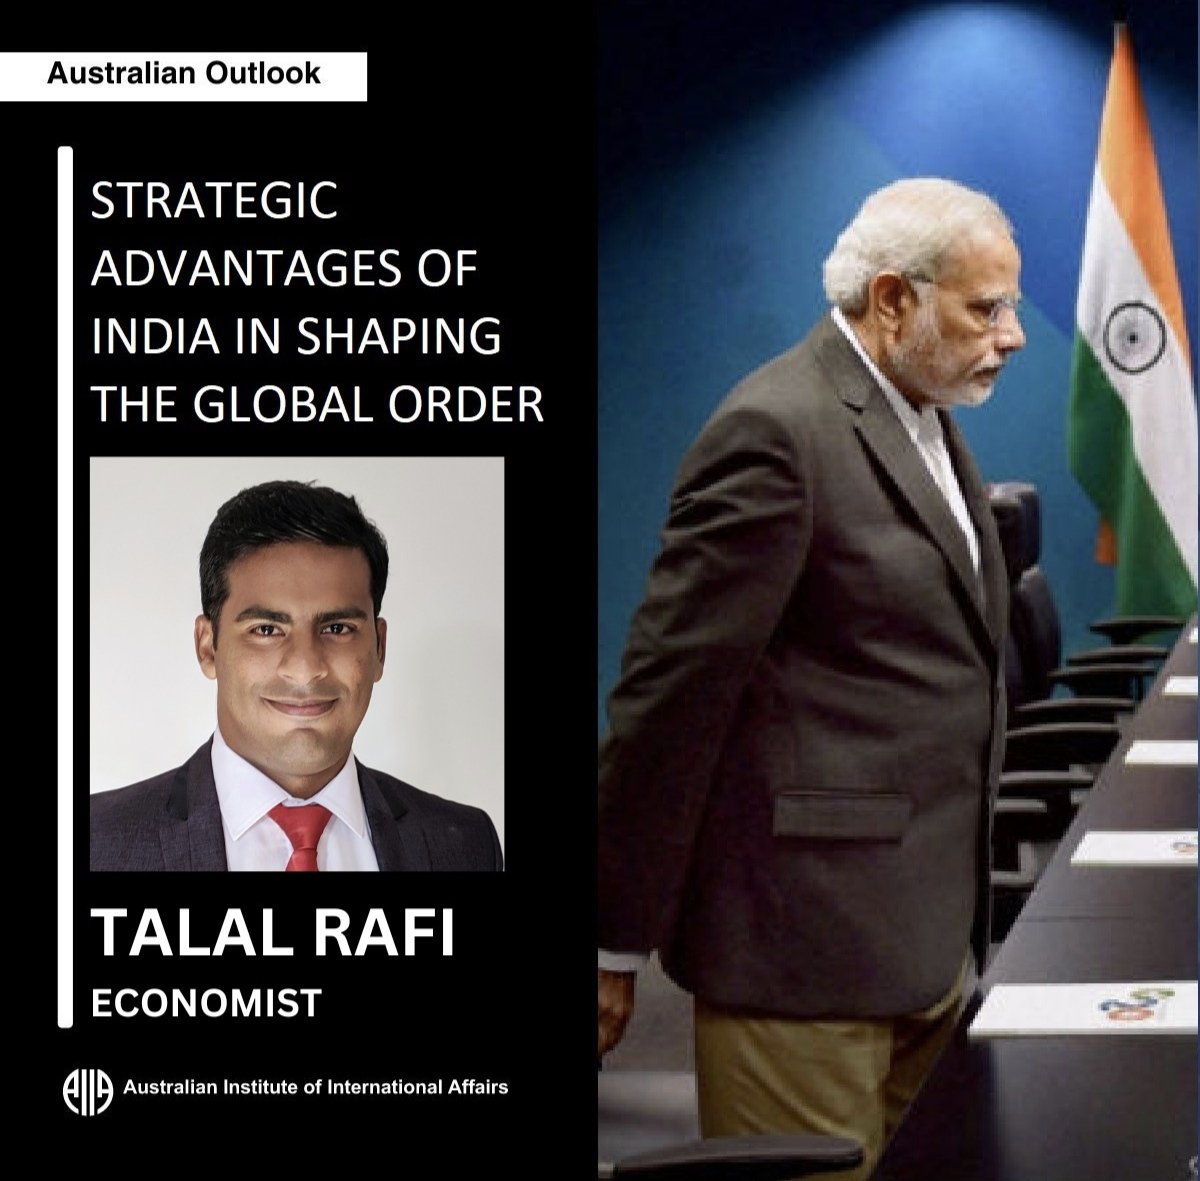 My paper on 'Strategic Advantages of India in shaping the global order' published by Australia's leading think tank, Australian Institute of International Affairs. internationalaffairs.org.au/australianoutl…